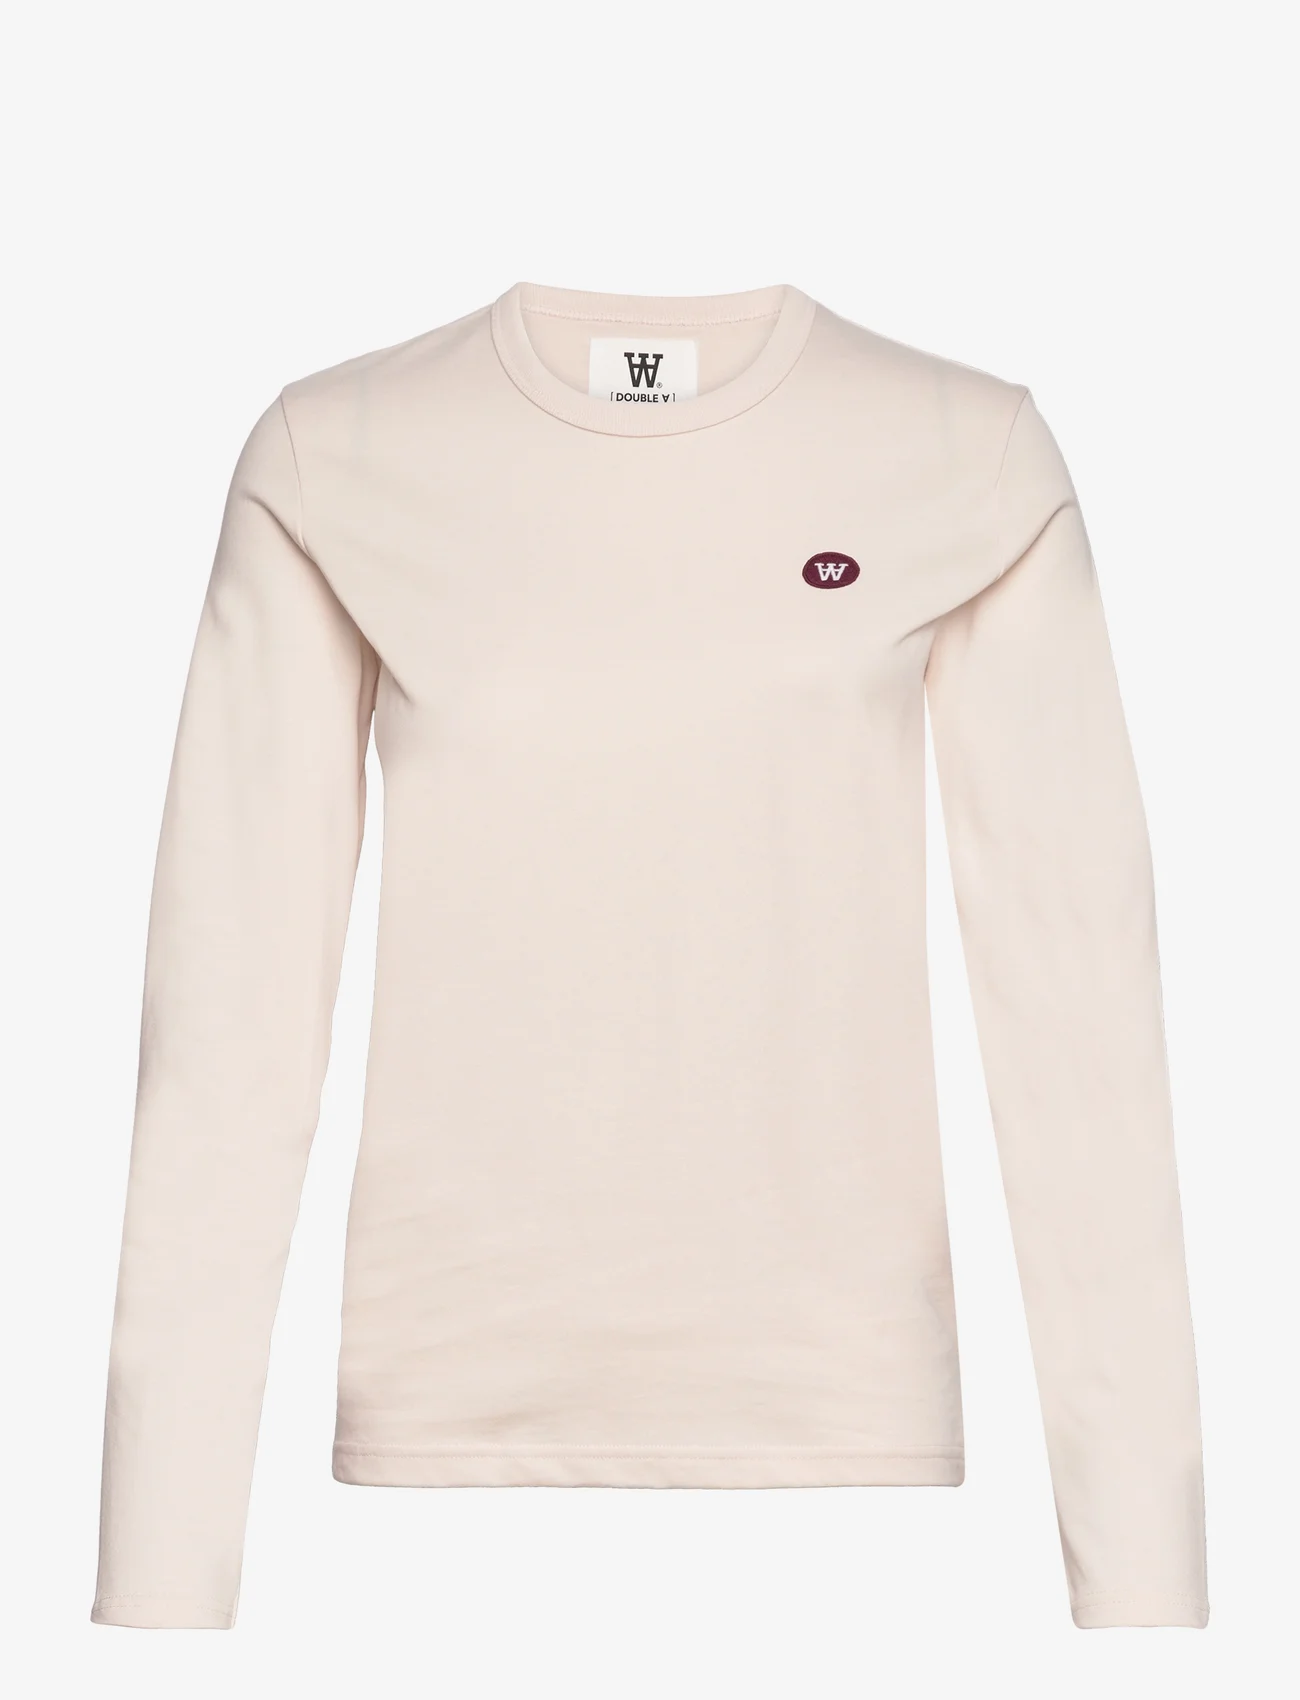 Double A by Wood Wood - Moa longsleeve - t-shirt & tops - almost mauve - 0